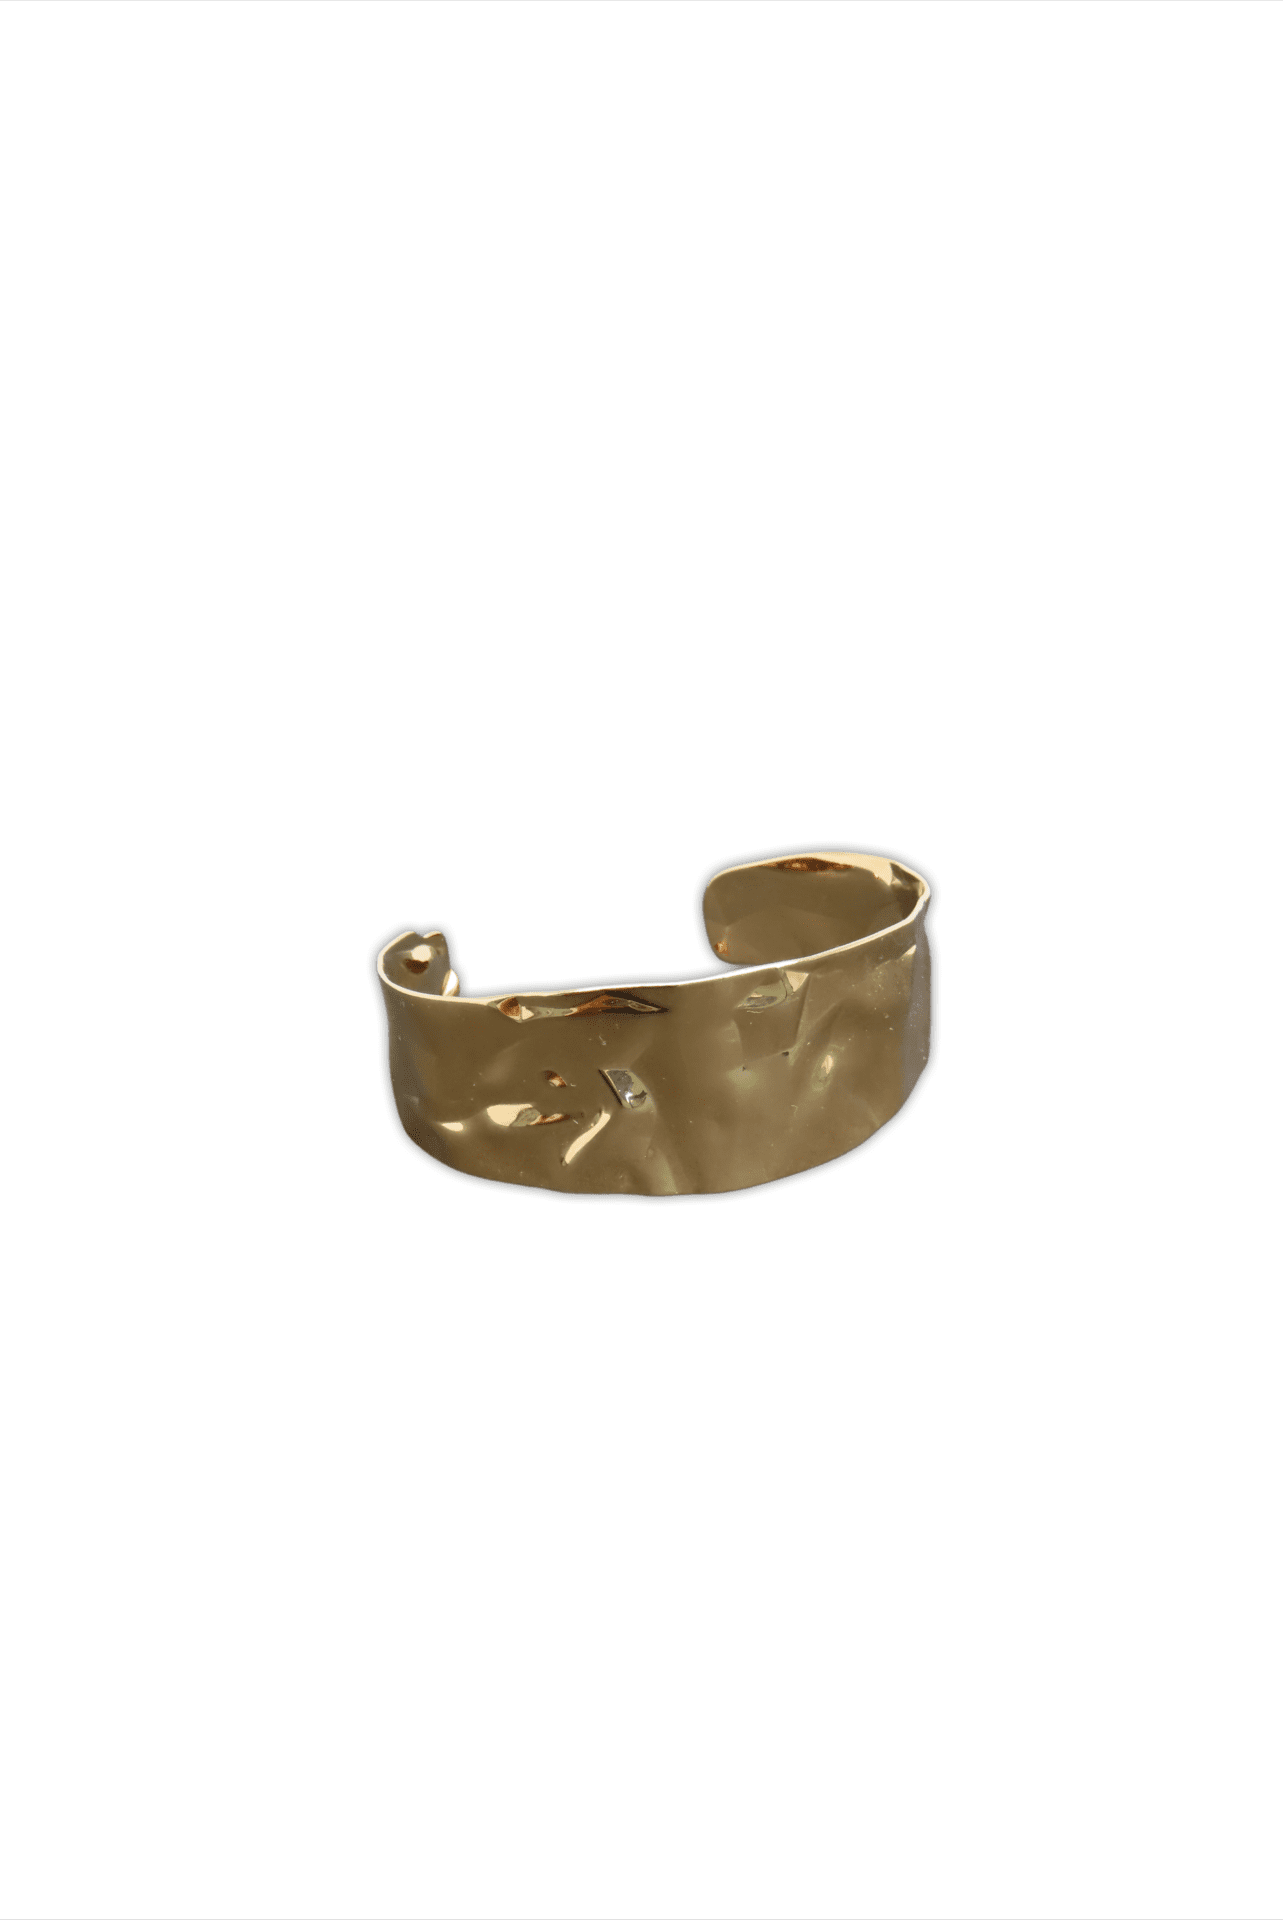 Cuff-like, hammered metal bracelet with a textured gold finish.